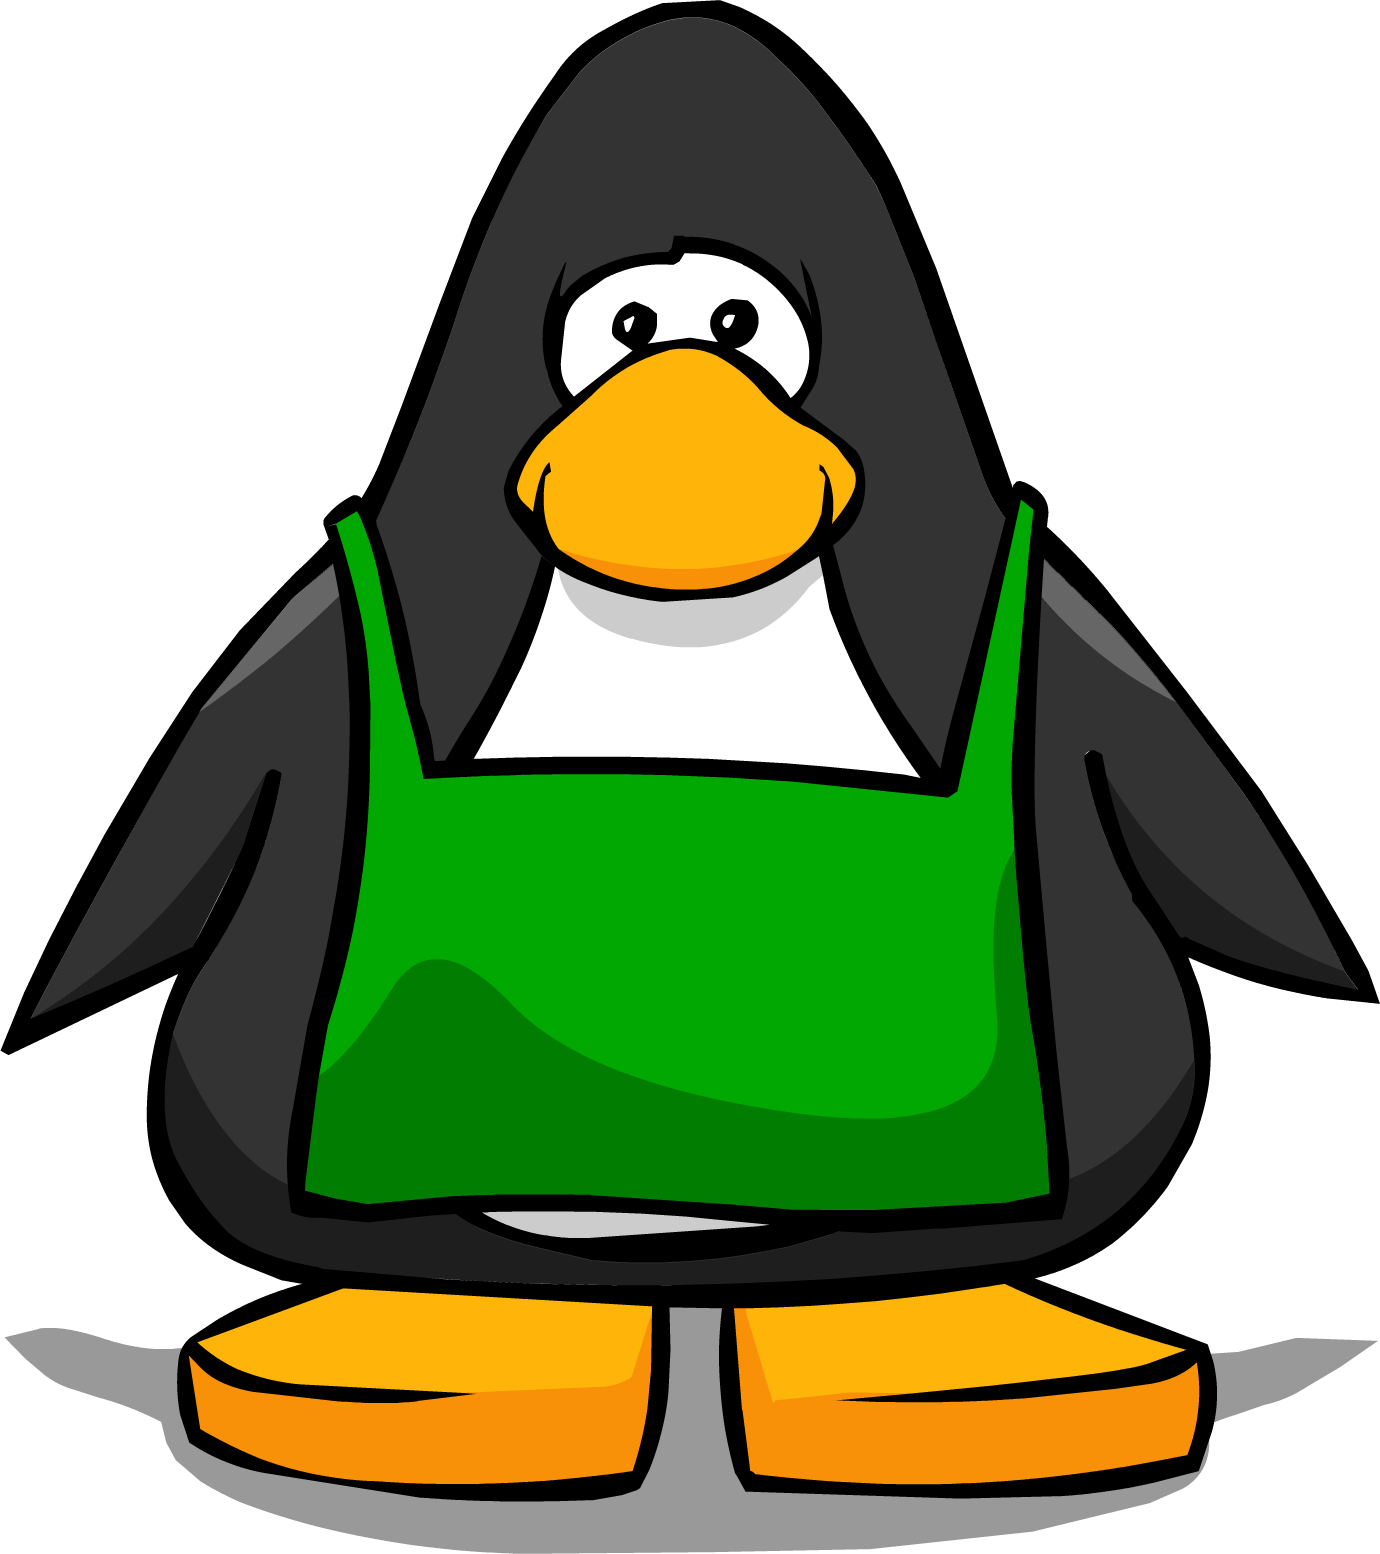 Coffee Apron From A Player Card - Club Penguin Black Belt (1380x1554)